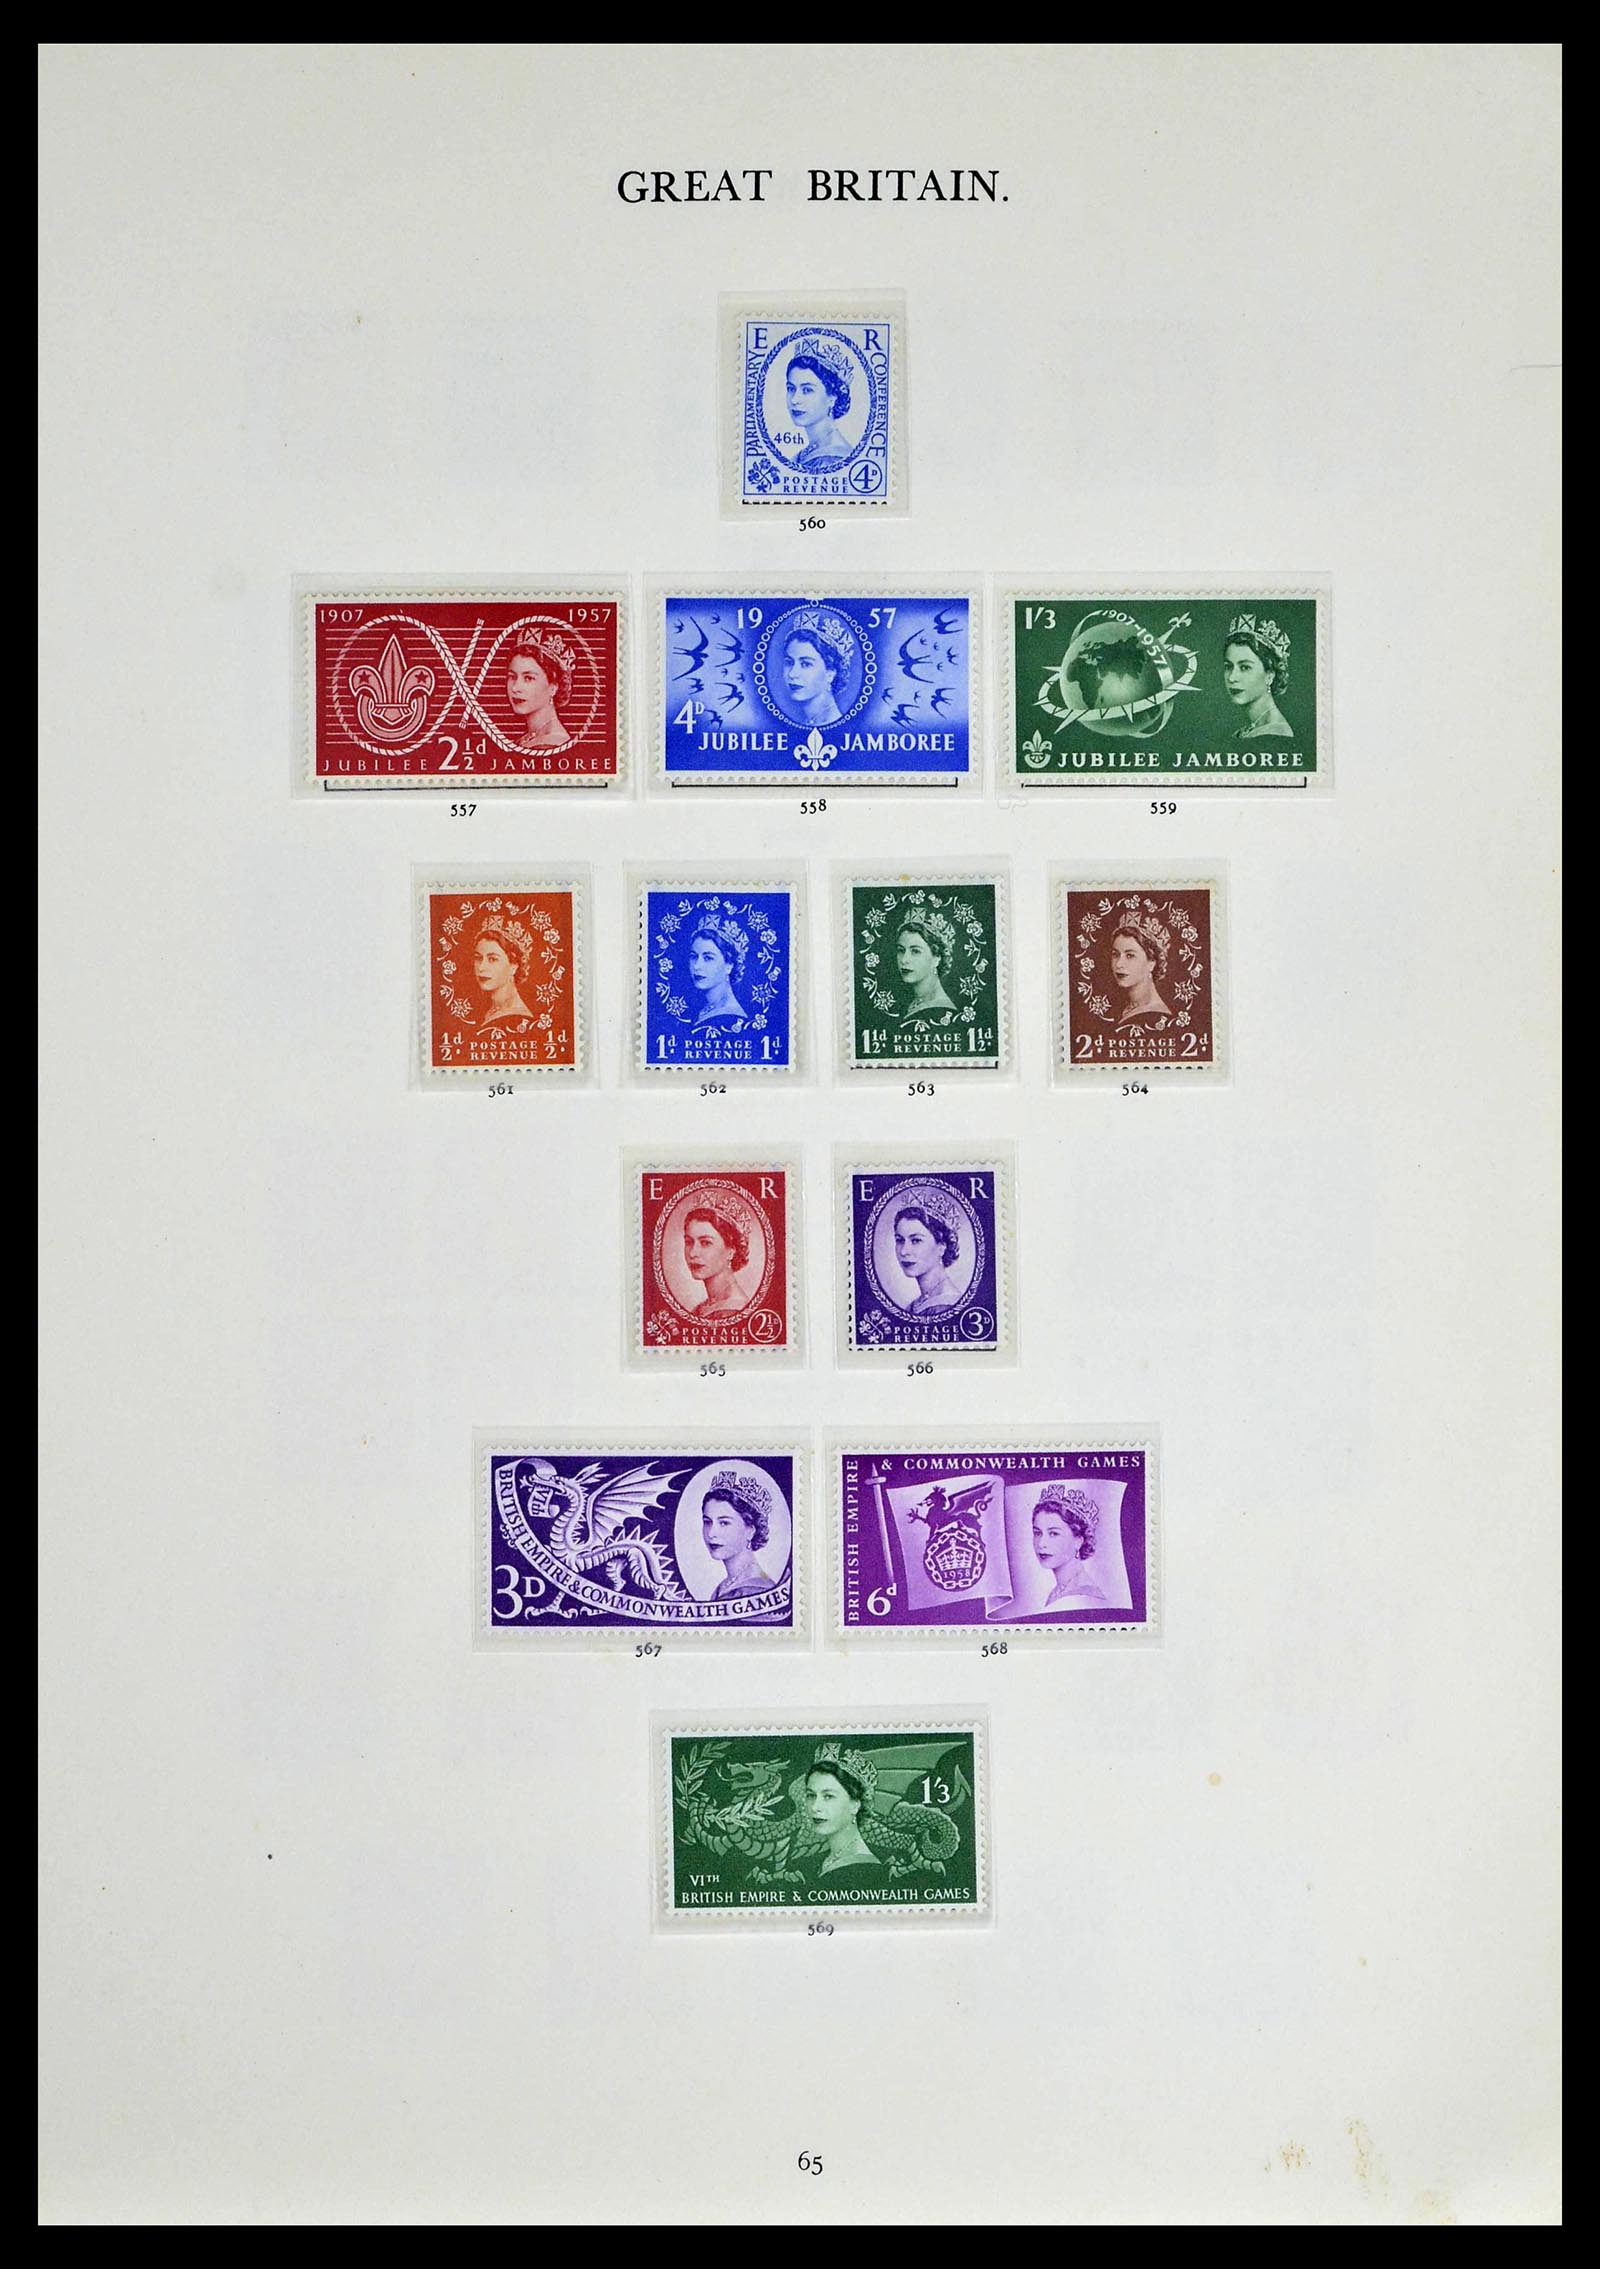 39025 0029 - Stamp collection 39025 Great Britain specialised 1840-1990.